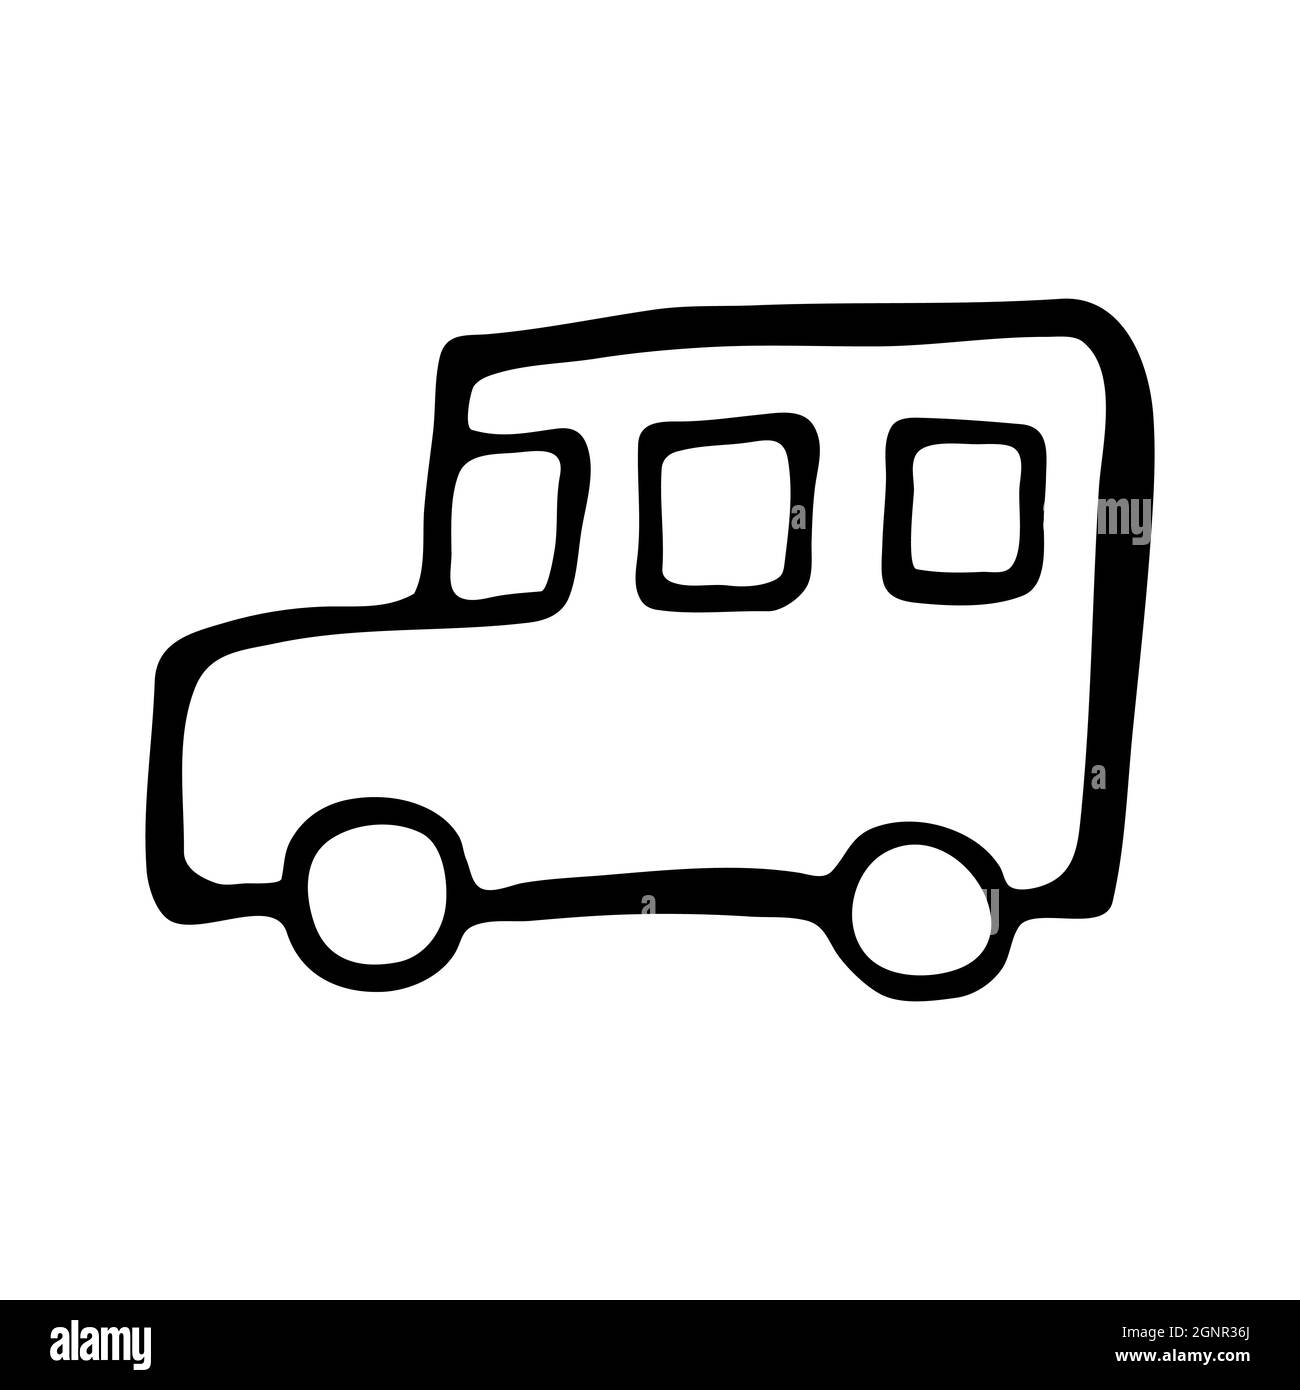 Hand drawn doodle style school bus in vector. Isolated illustration on white background. For interior design, wallpaper, packaging, poster Stock Vector